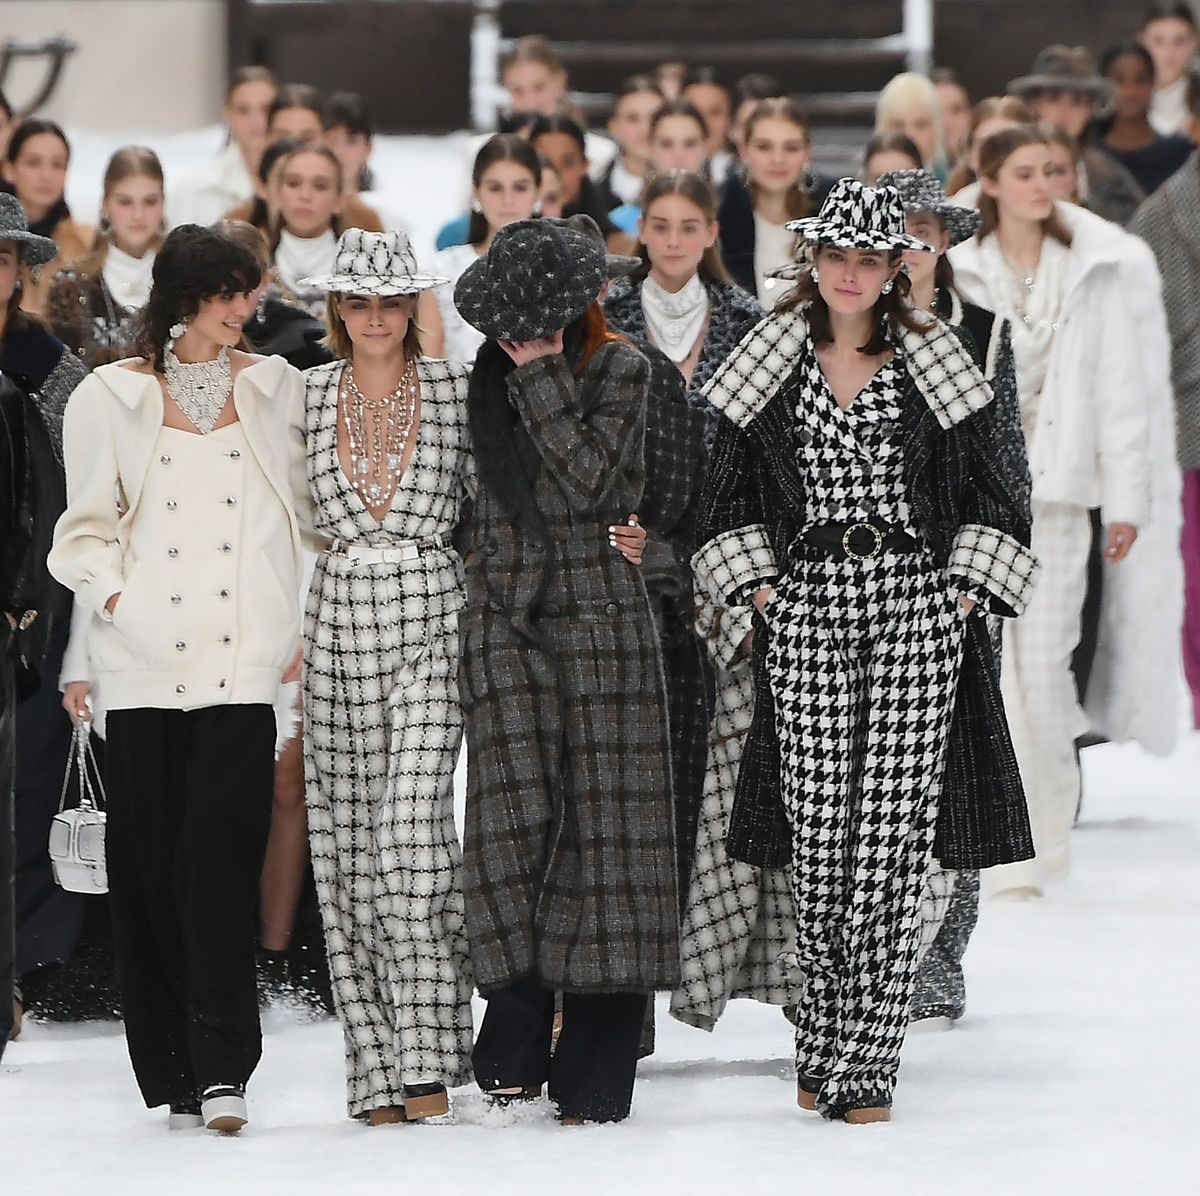 What Karl Lagerfeld's Final Collection for Chanel Was Like